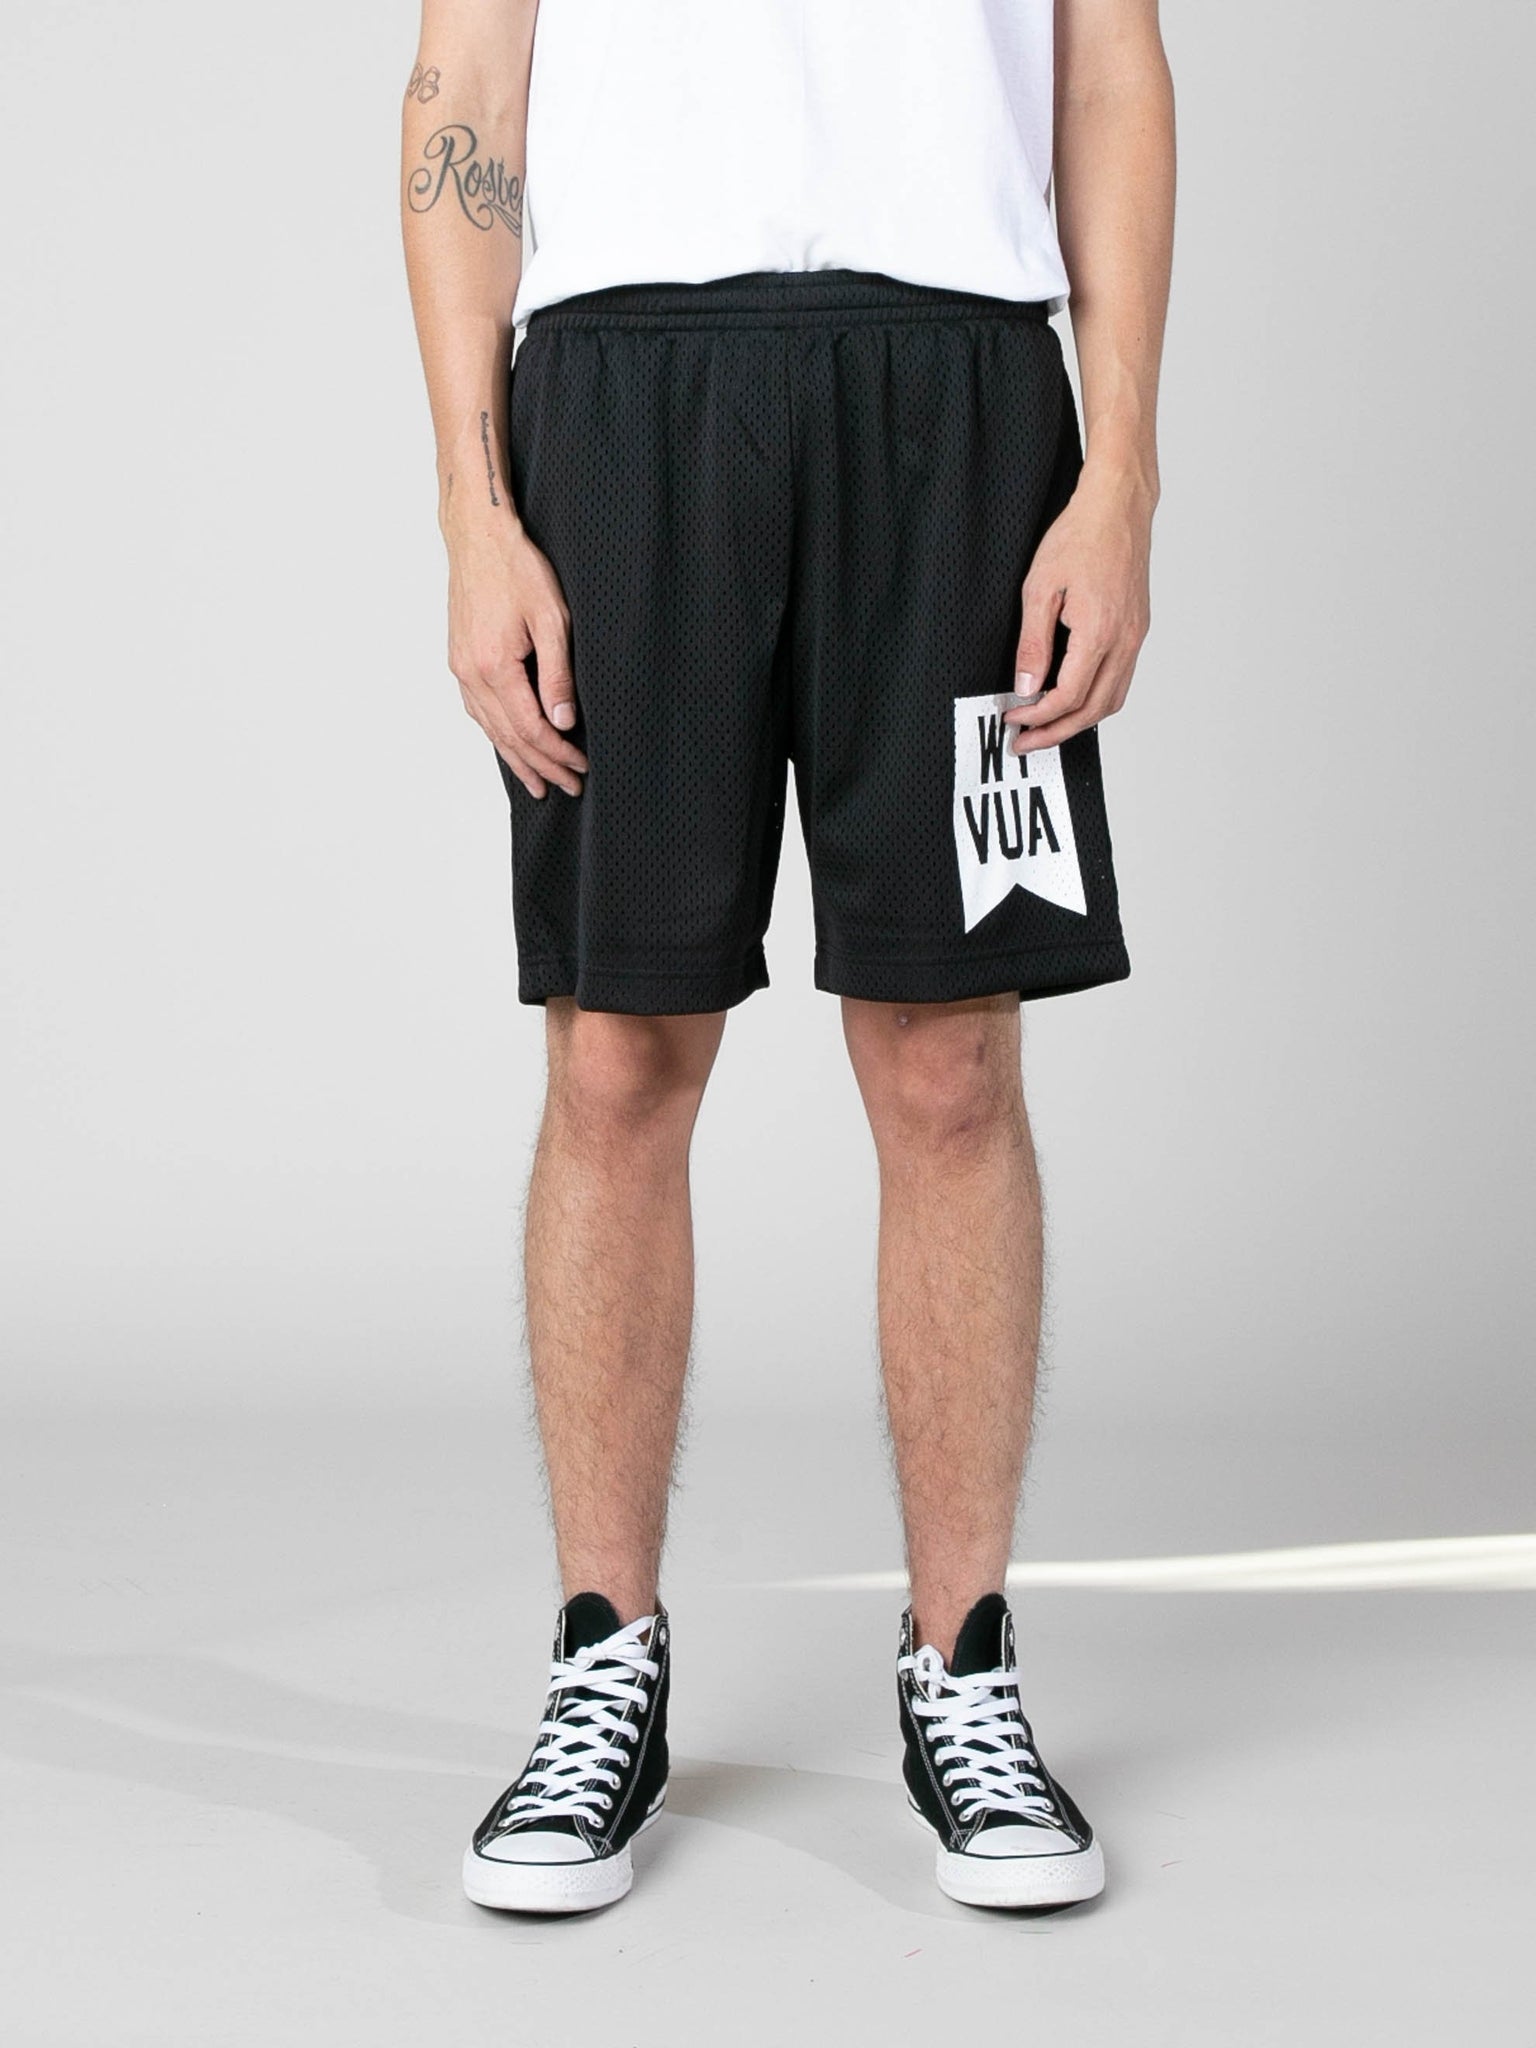 Buy Shorts Online at UNION LOS ANGELES